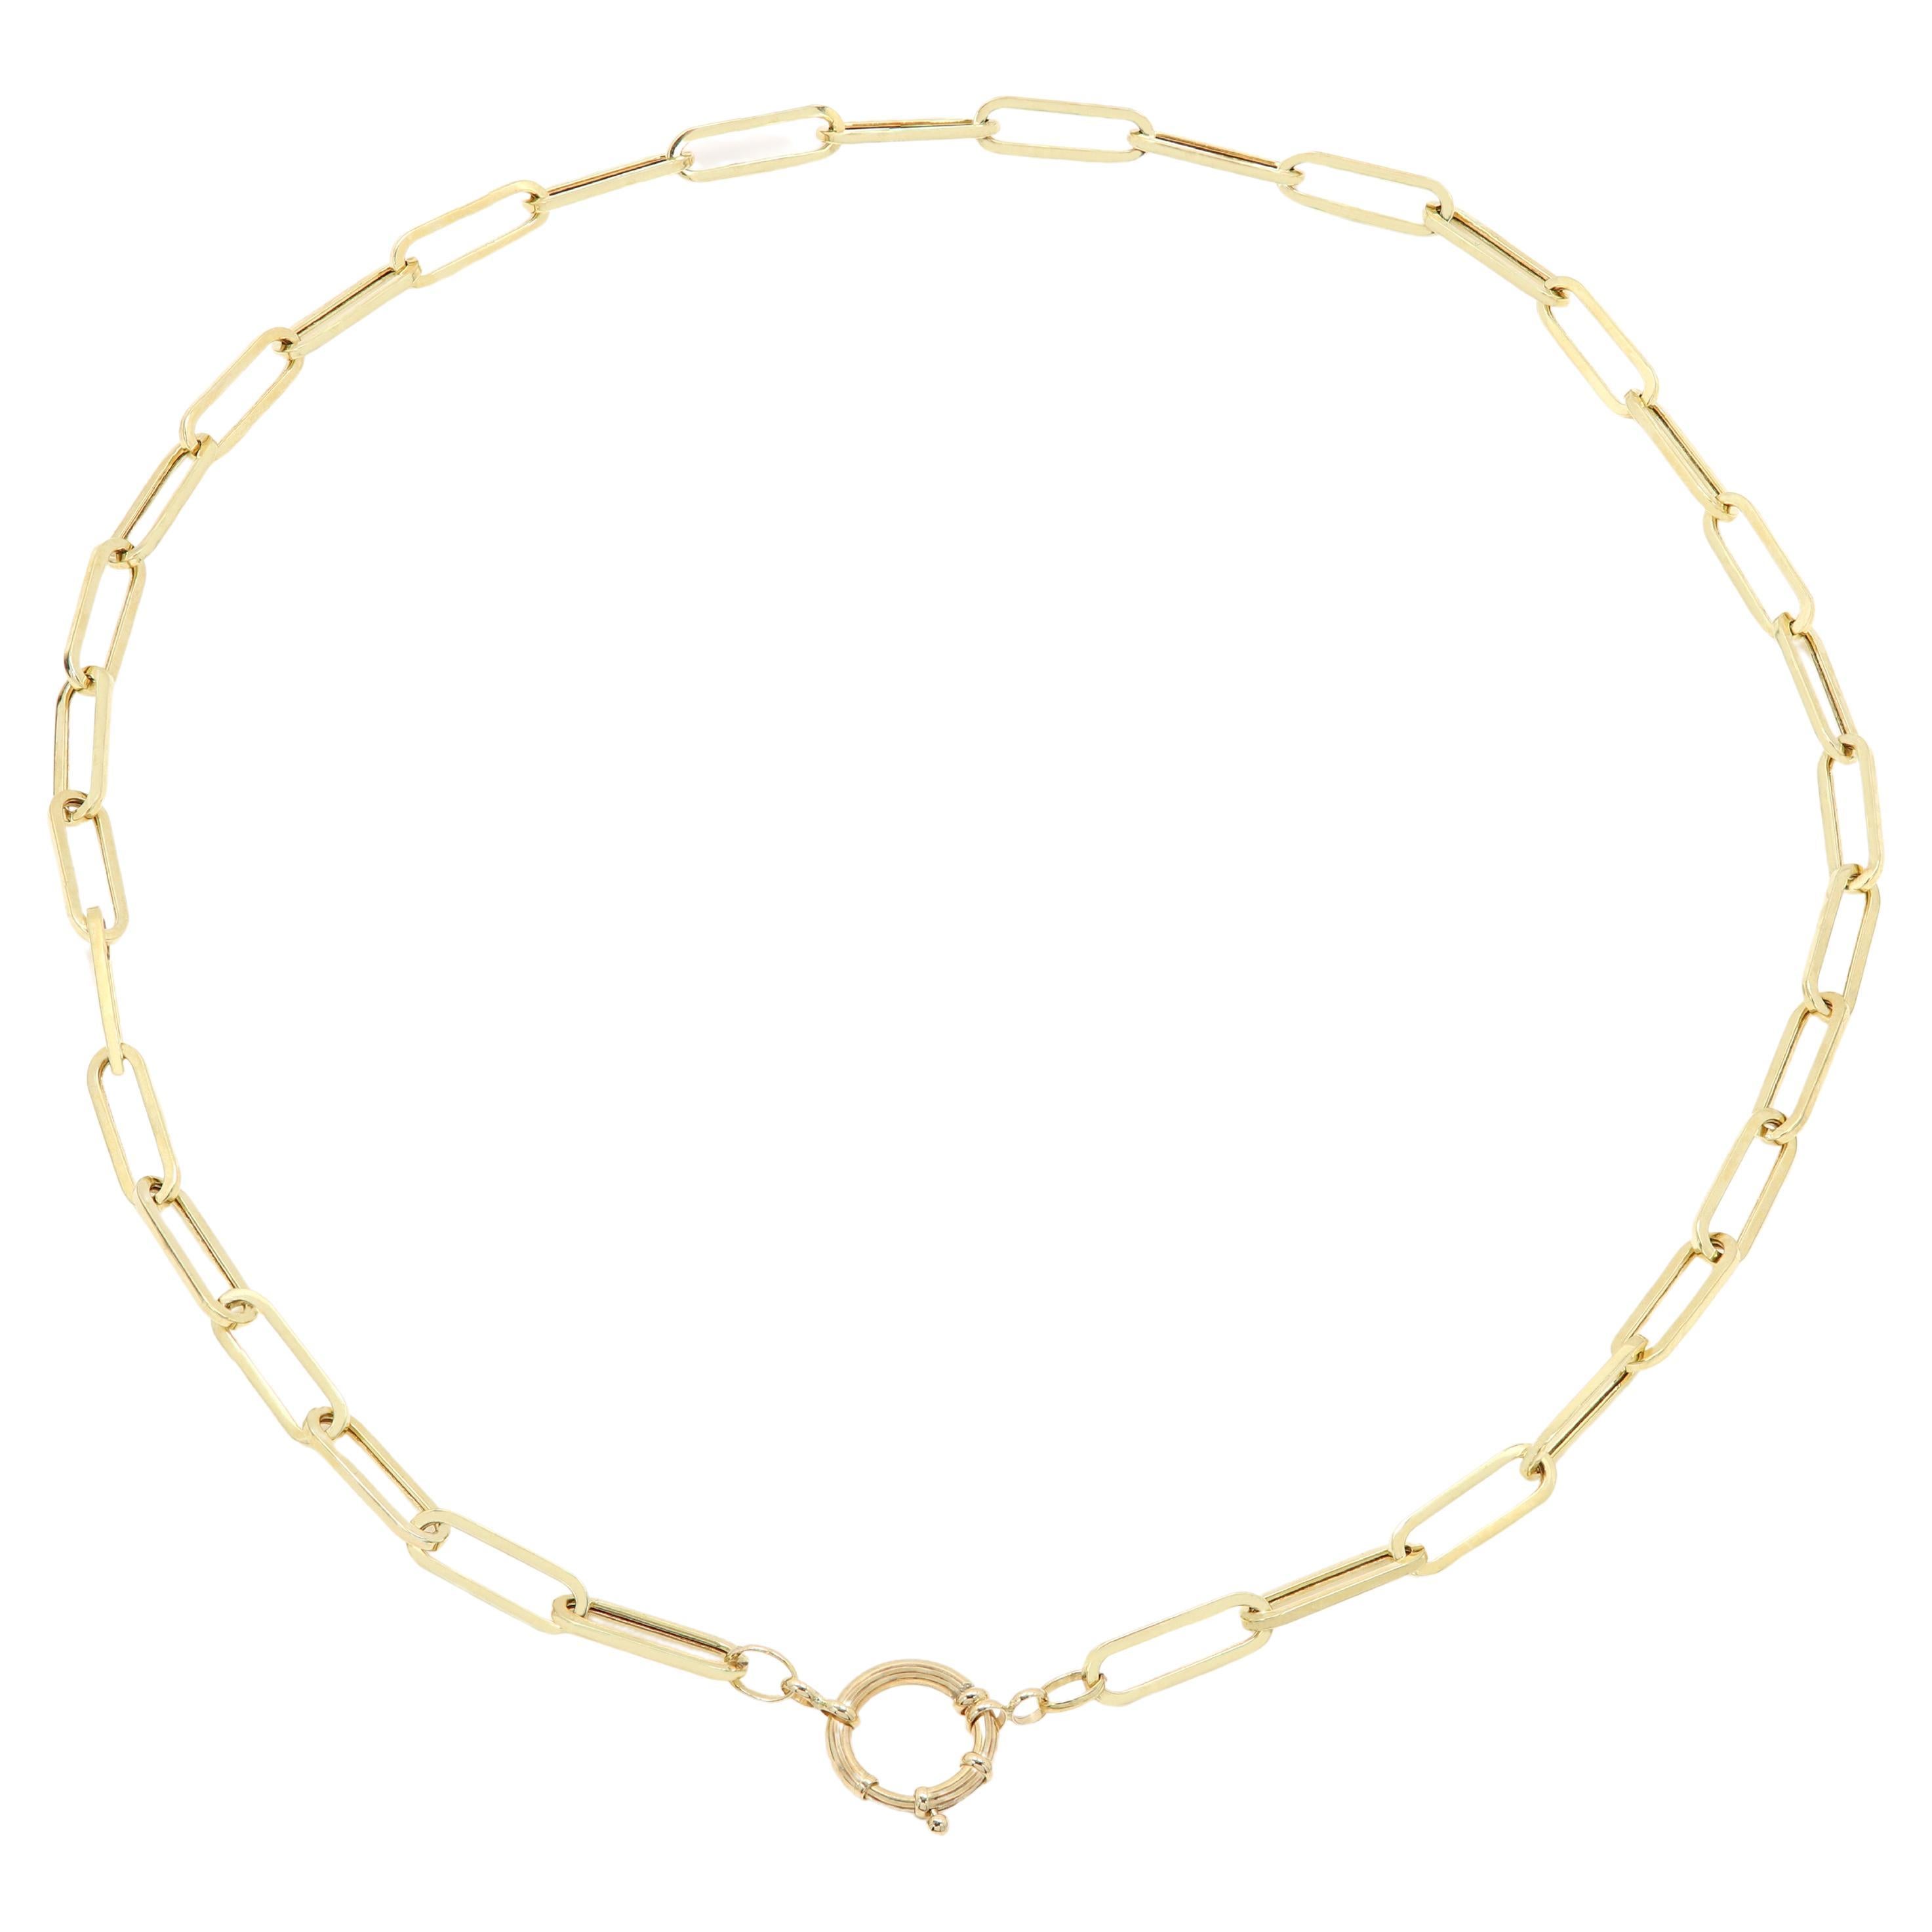 Italian Made  - Chain Necklace
Medium size Paperclip Style  -  classic Link Chain with front Lock
Paperclip size - 5mm width 
Necklace Length: 18' Inch.
Real 14k Gold - Yellow Gold.
Approx weight total: 7.3 grams.
Enhancer Spring Lock is all 14k